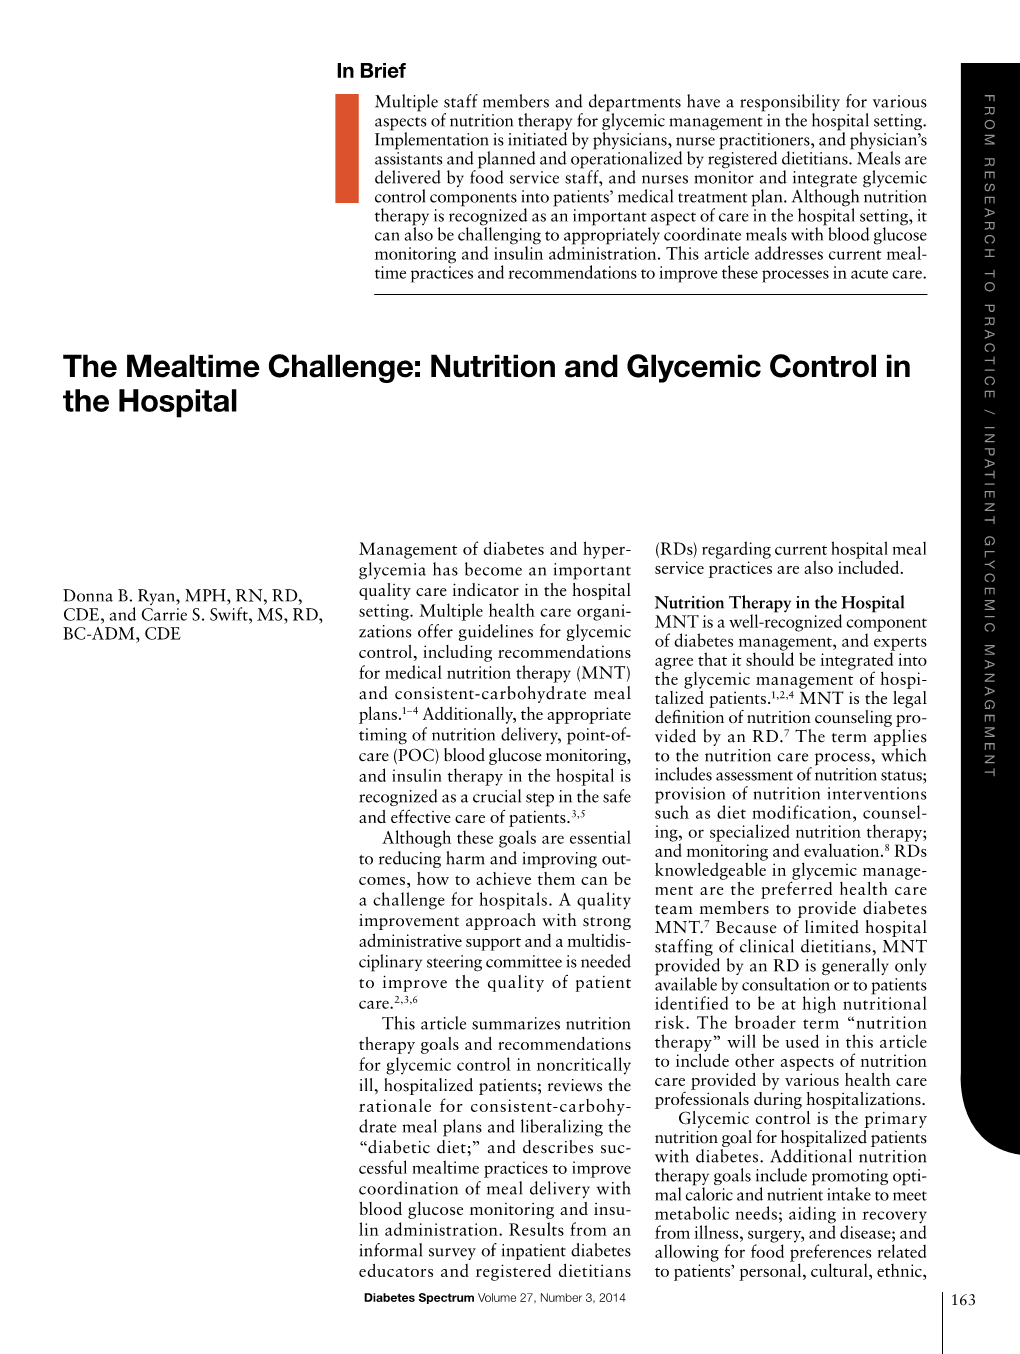 The Mealtime Challenge: Nutrition and Glycemic Control in the Hospital Atient Glycemic M Ana G Ement